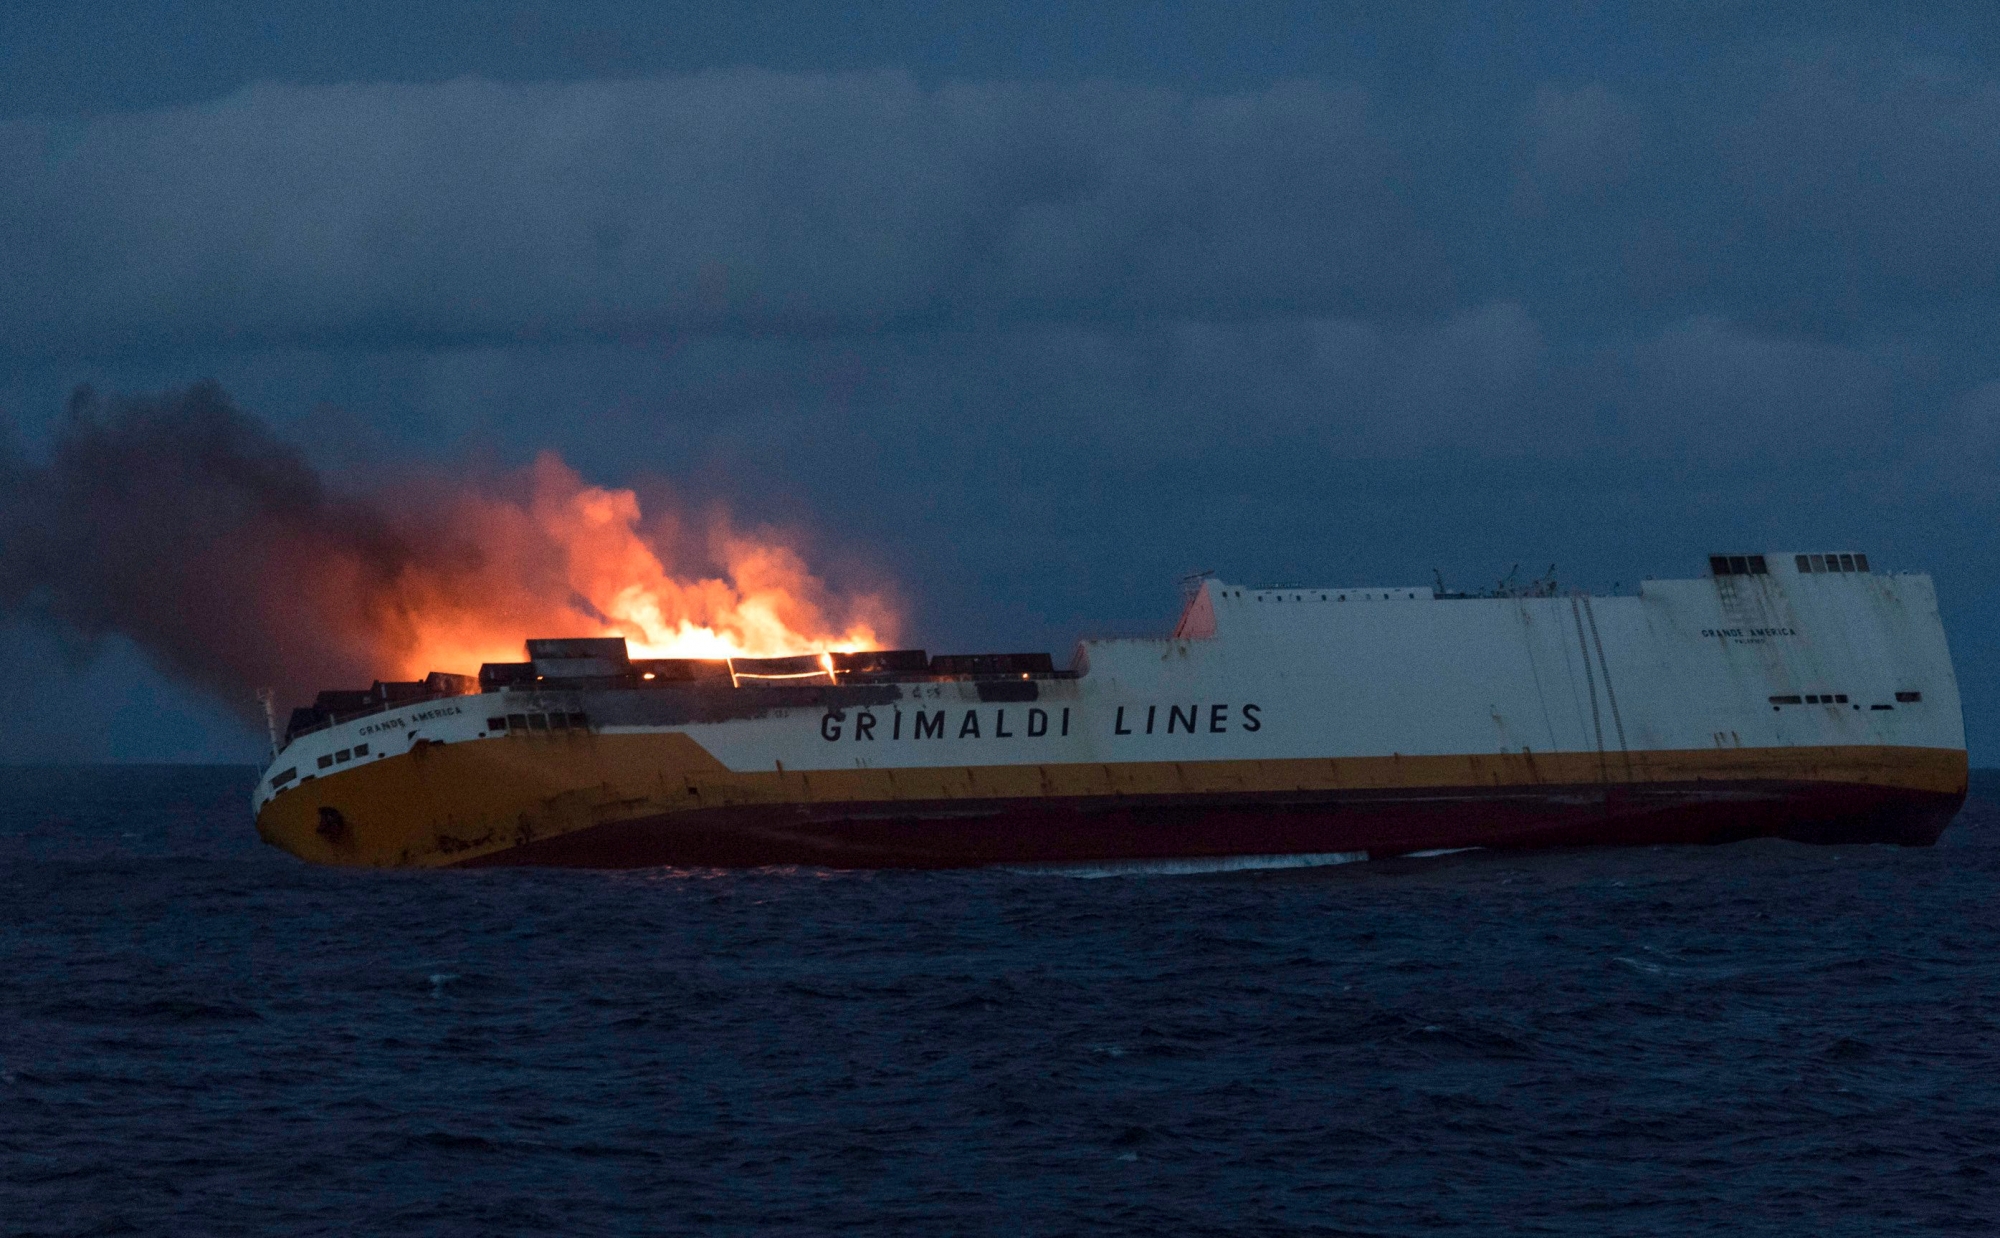 This photo provided on Thursday March 14, 2019 by the Marine Nationale, shows the Grimaldi vessel Grande America on fire in the Bay of Biscay, off the west coast of France, Monday March 11, 2019. French authorities are working to contain an oil spill off the Atlantic Coast after the Italian tanker sank following a fire. French and British rescue teams saved all 27 people aboard the Grande America tanker after it sank Tuesday. (Loic Bernardin/Marine Nationale via AP) France Oil Spill